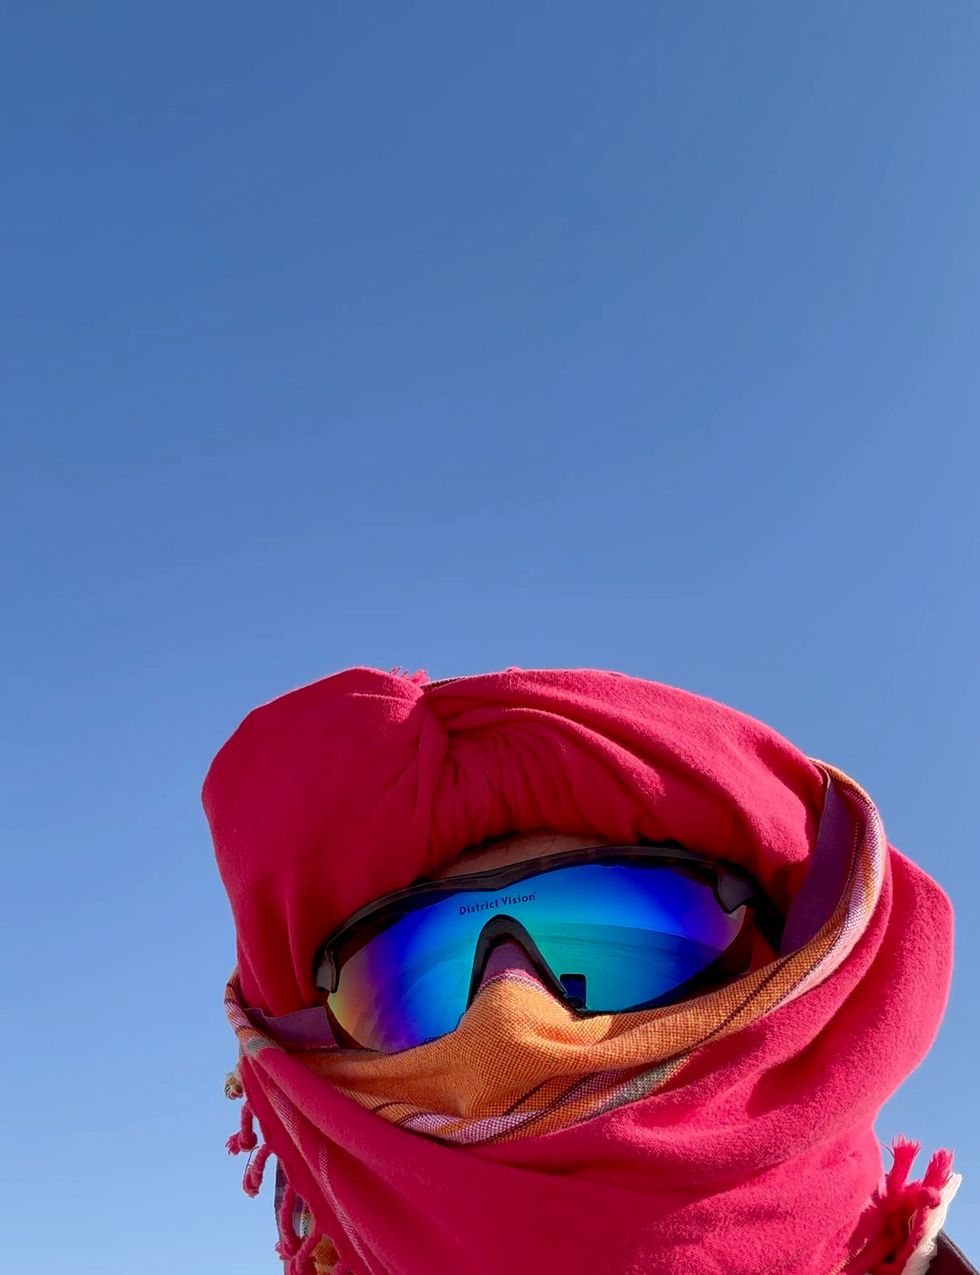 a person wearing a red hat and sunglasses